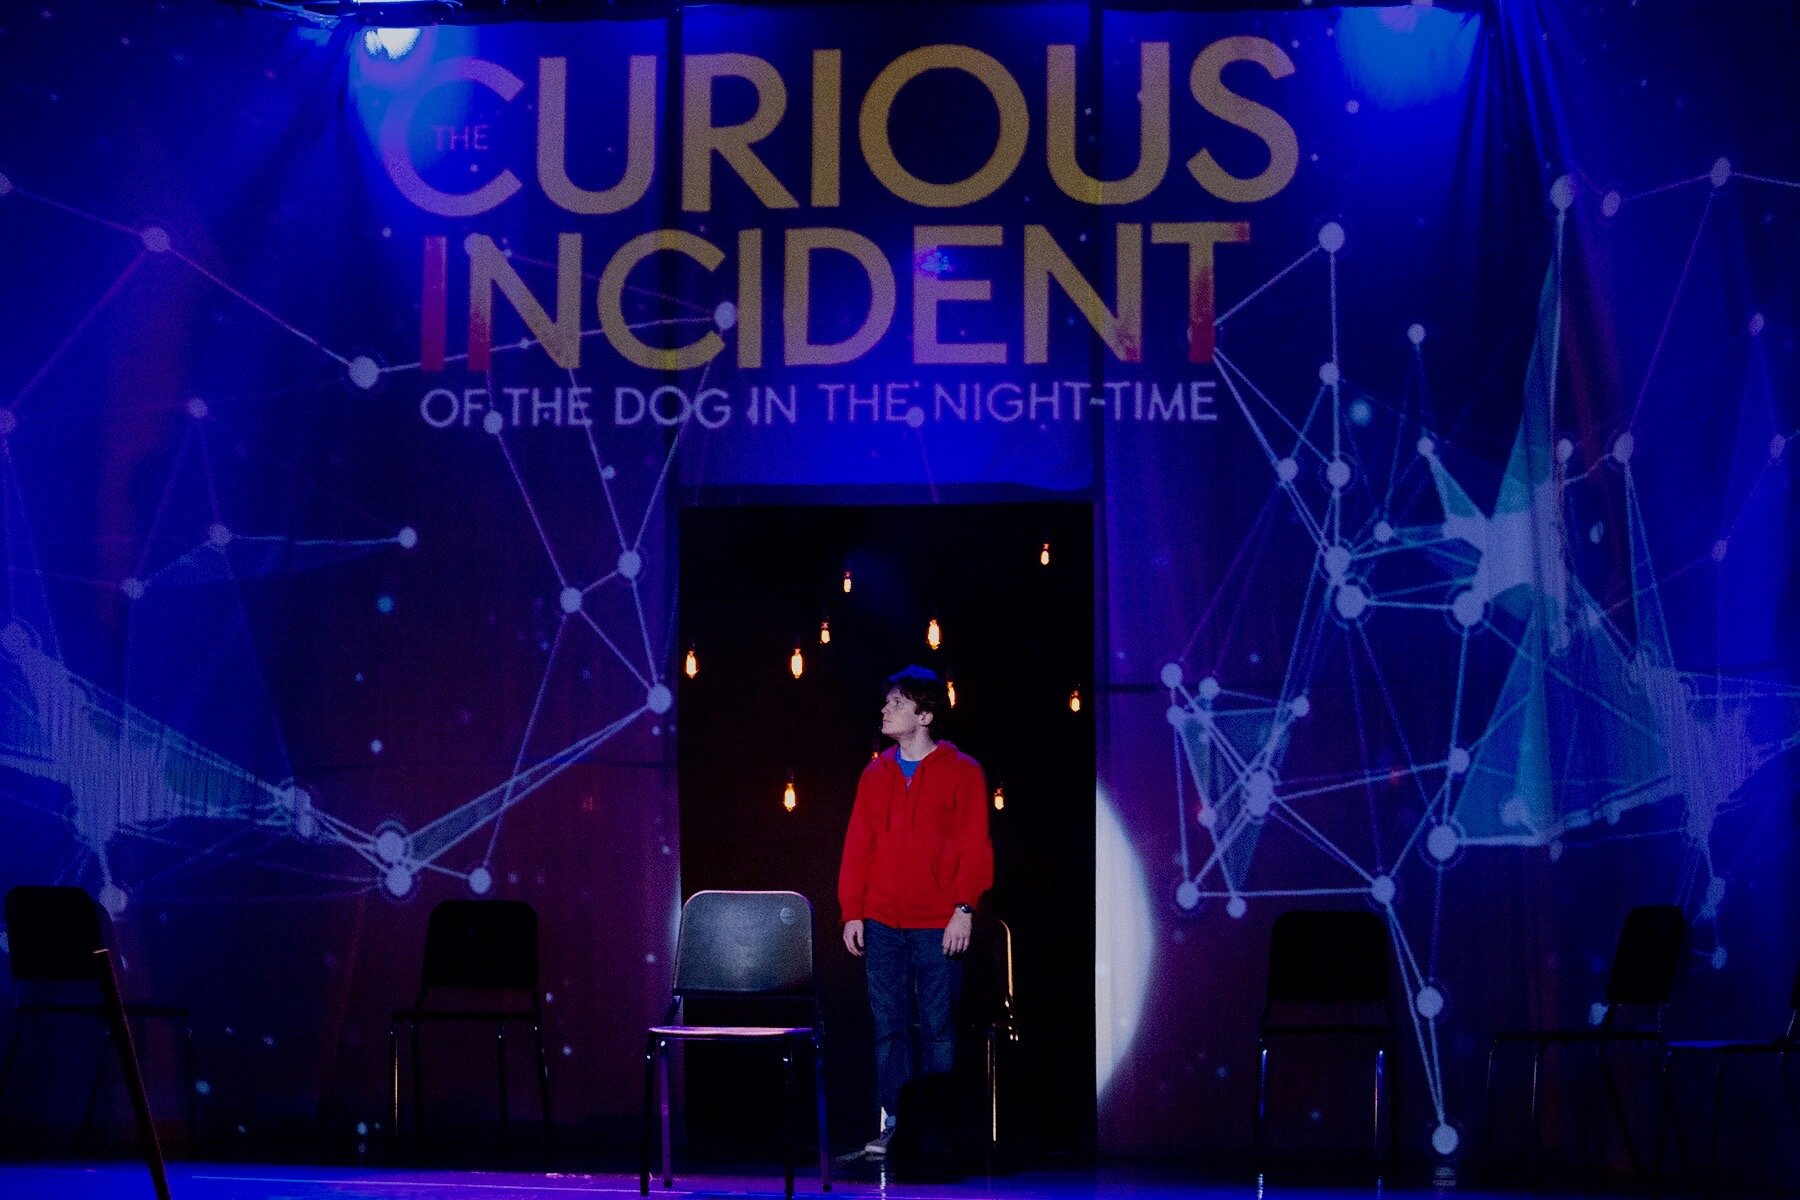 THE CURIOUS INCIDENT OF THE DOG IN THE NIGHT-TIME (2019)